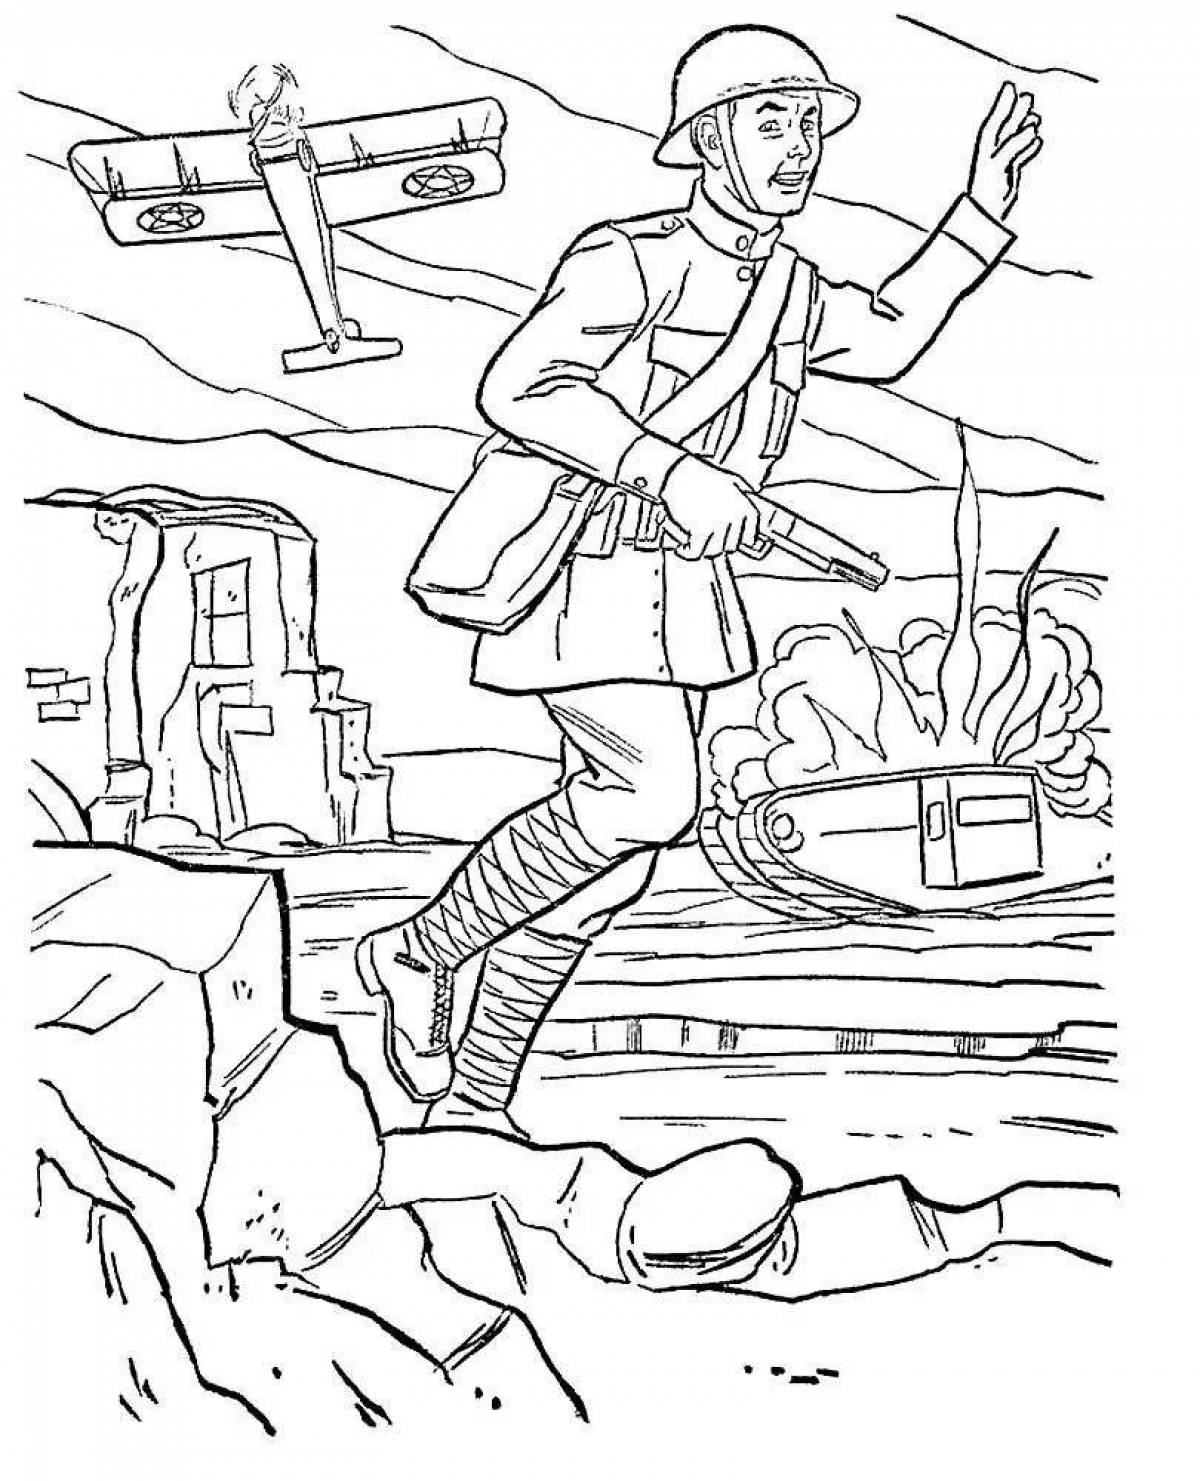 Fantastic war coloring book for 6-7 year olds